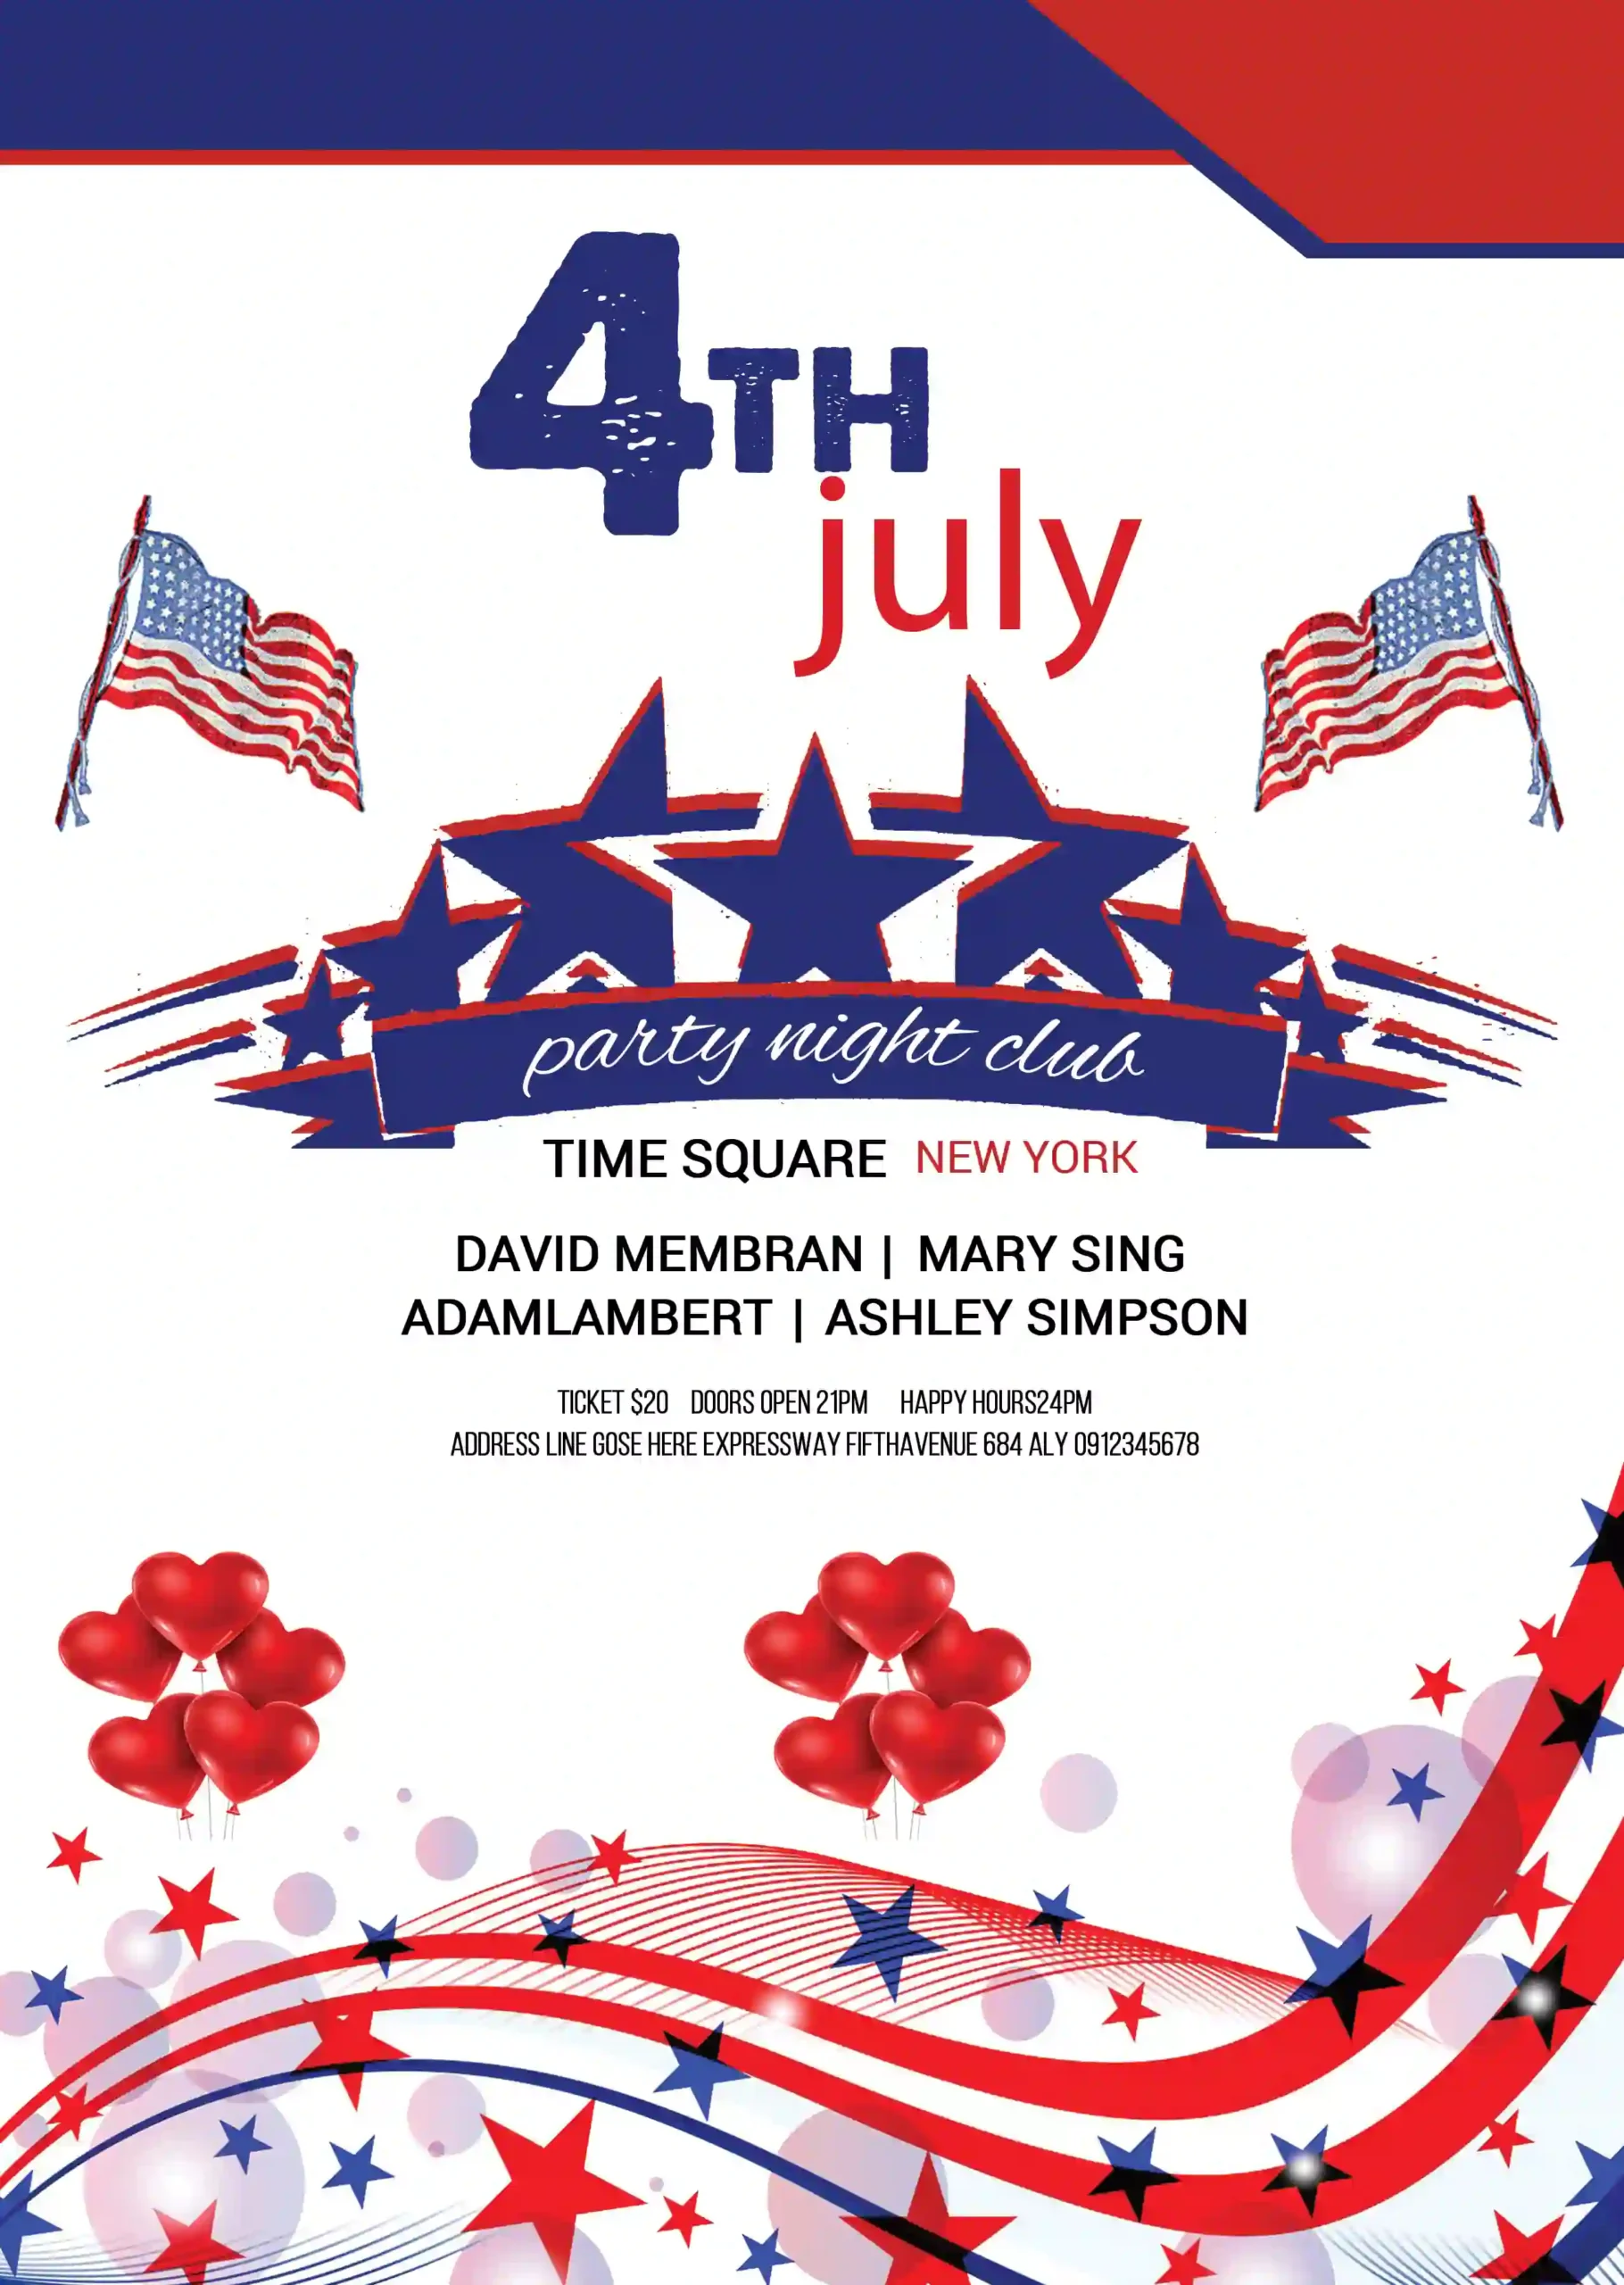 American Day Poster Design PSD Free Download